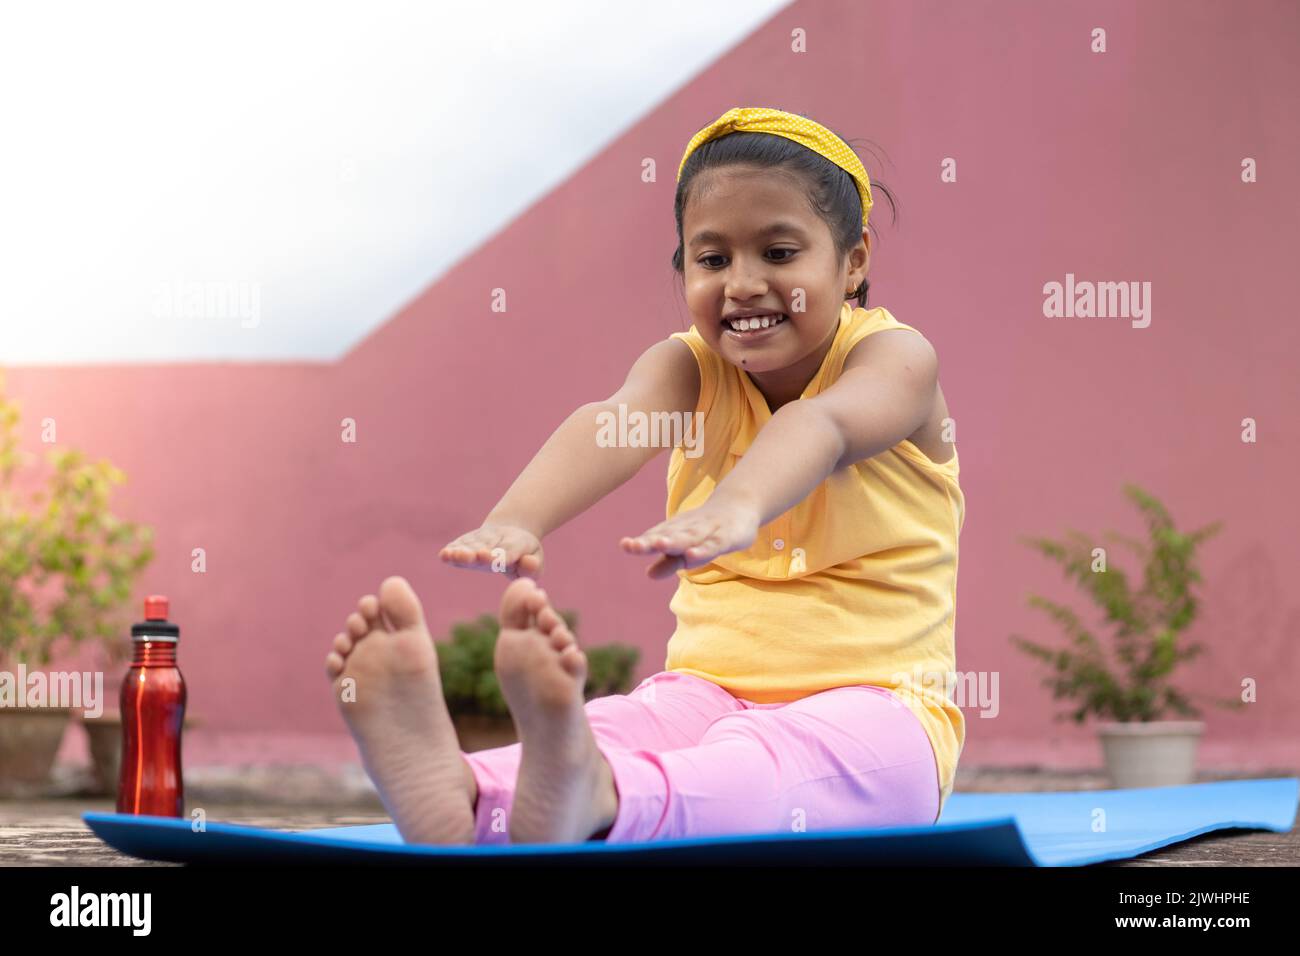 An Indian girl child practicing yoga on yoga mat outdoors Stock